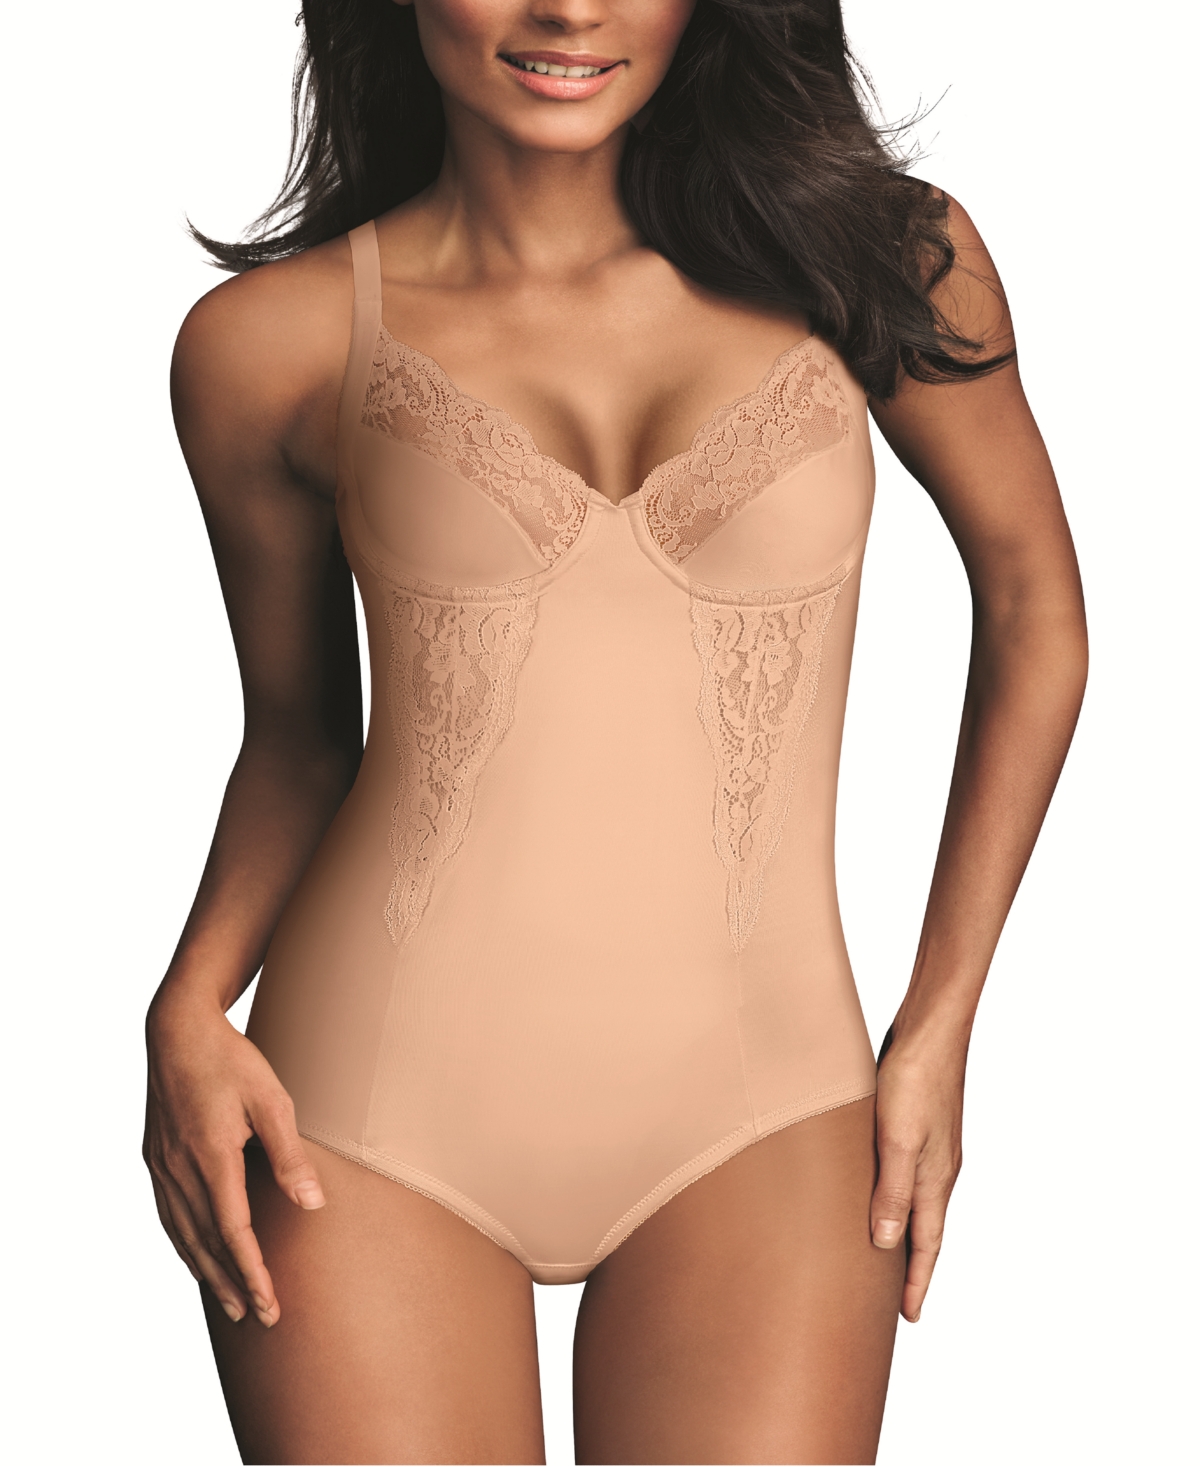 Women's Firm Control Embellished Unlined Shaping Bodysuit1456 - Buttercream (Nude )